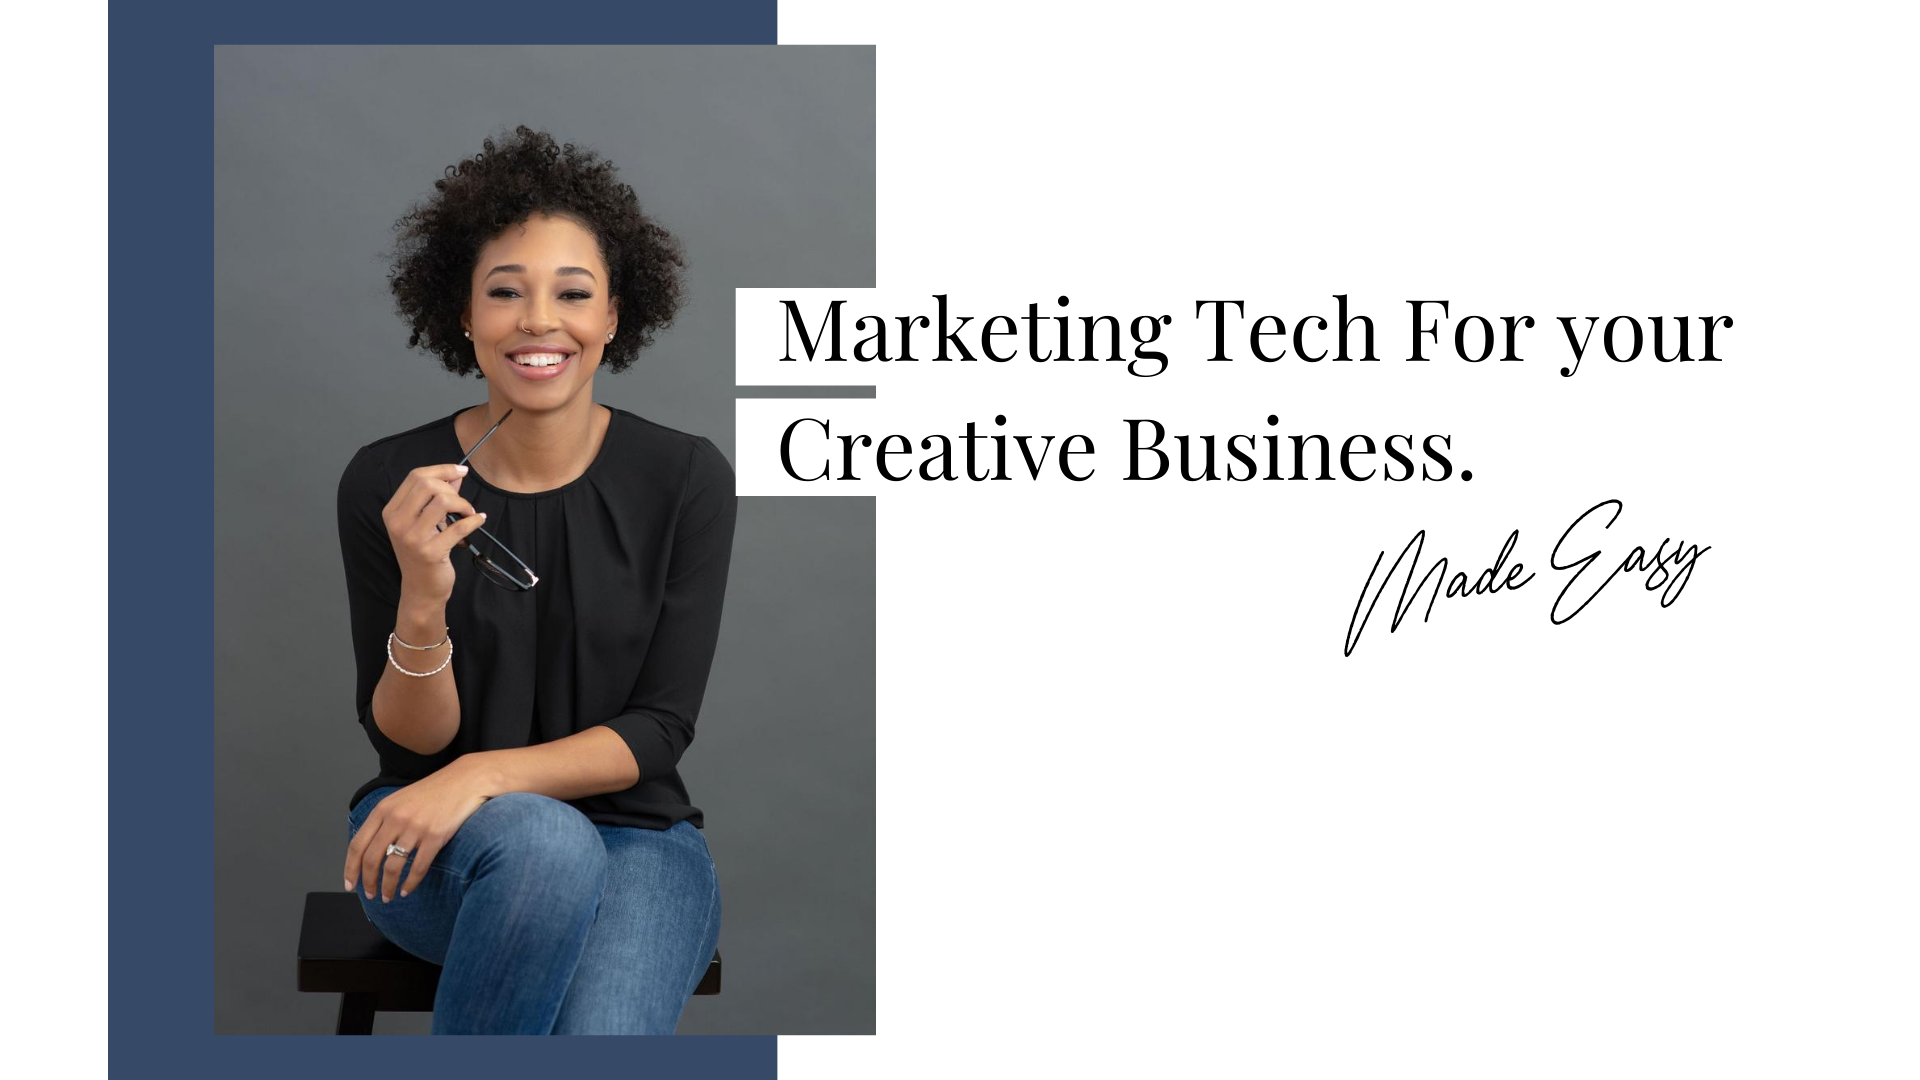 Marketing Tech For your Creative Business. (1).png